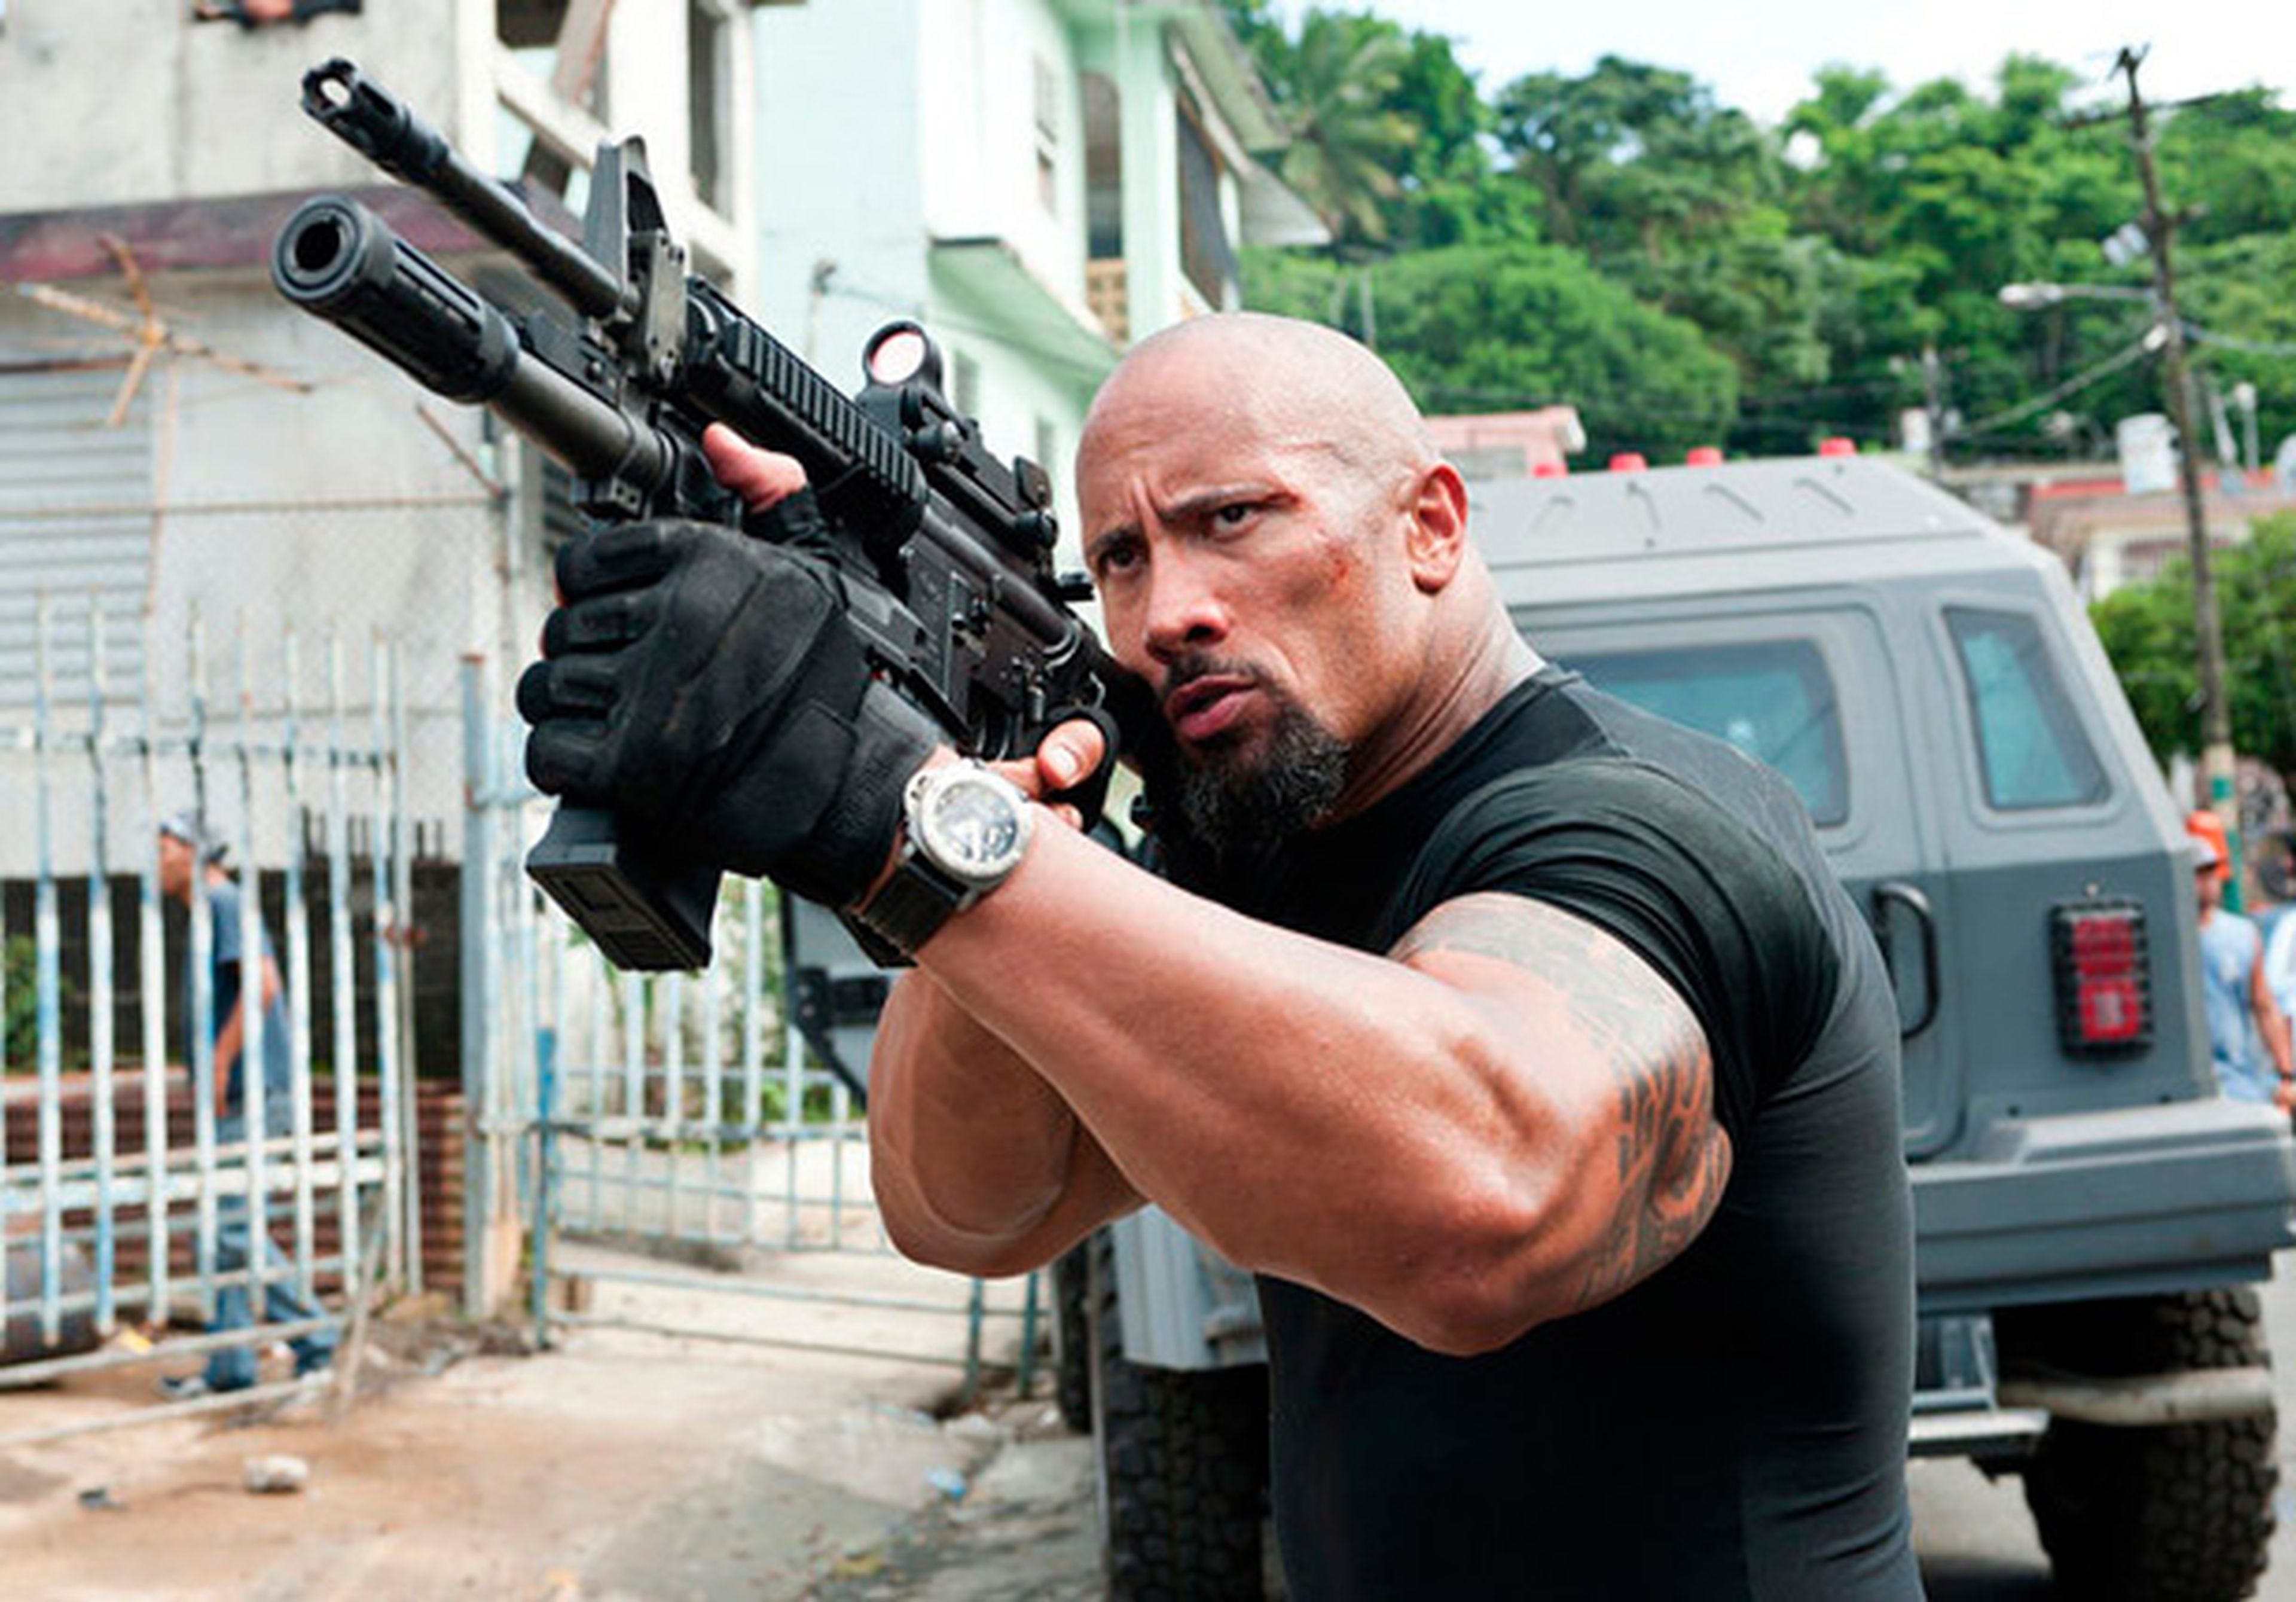 Fast & Furious - posible spin-off con Dwayne Johnson de protagonista